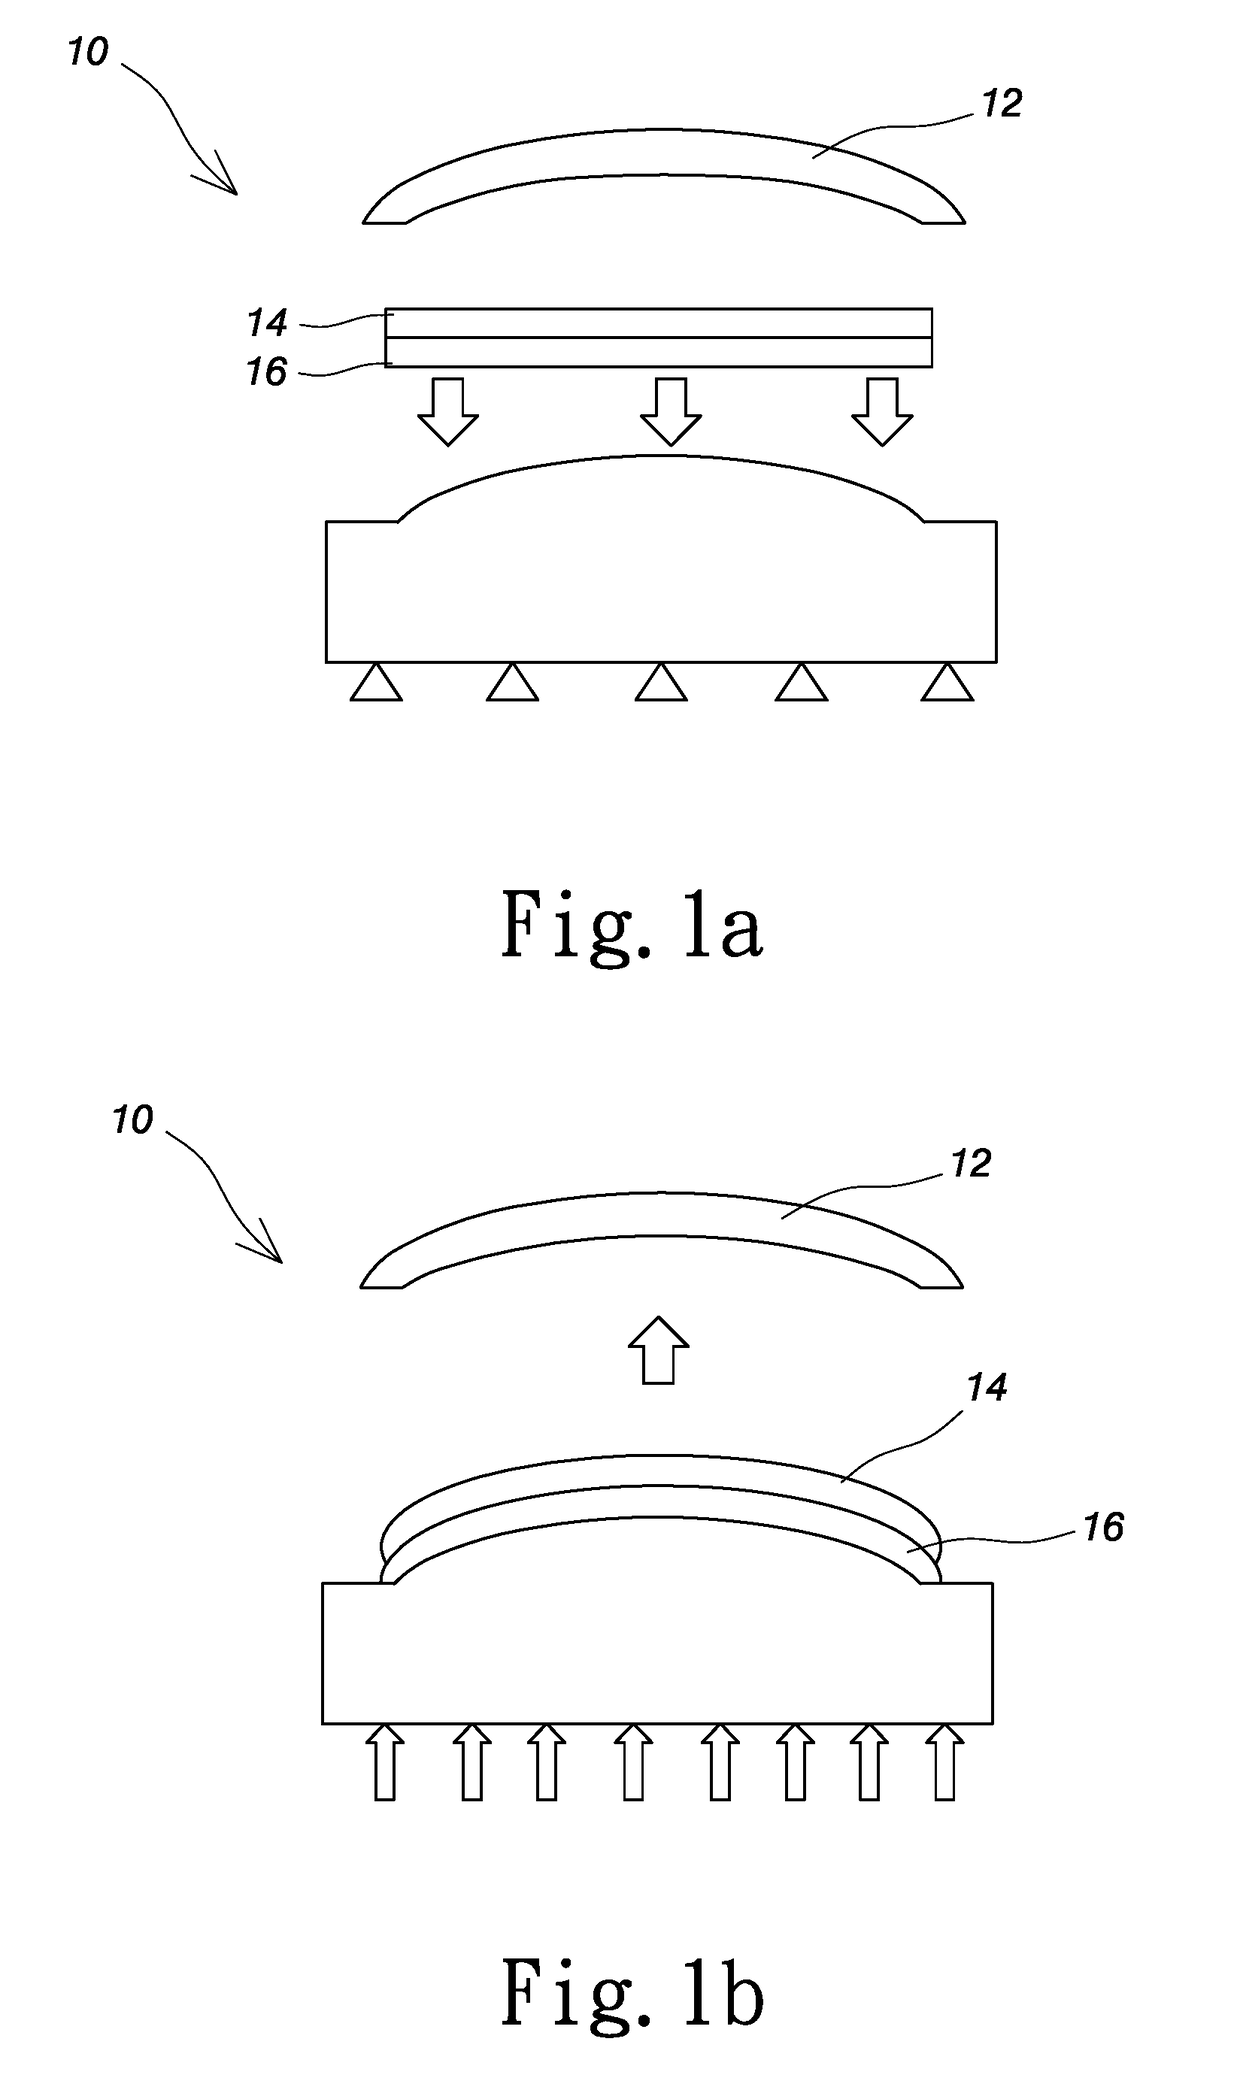 Lamination structure of two-axis curvy touch panel